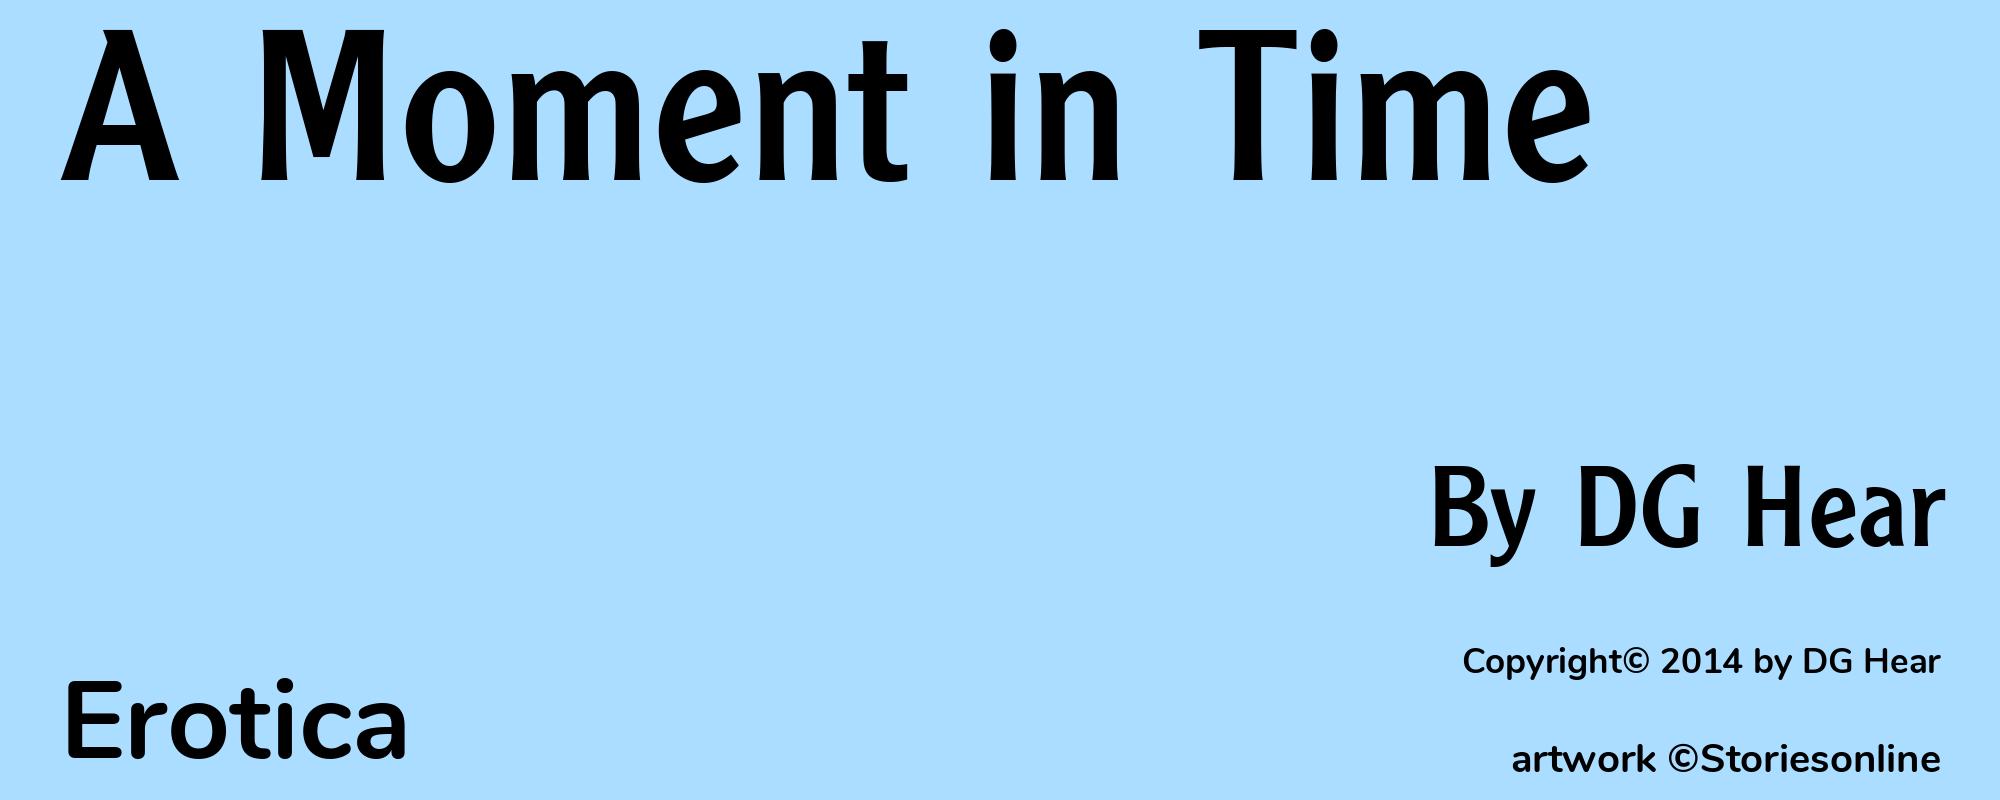 A Moment in Time - Cover